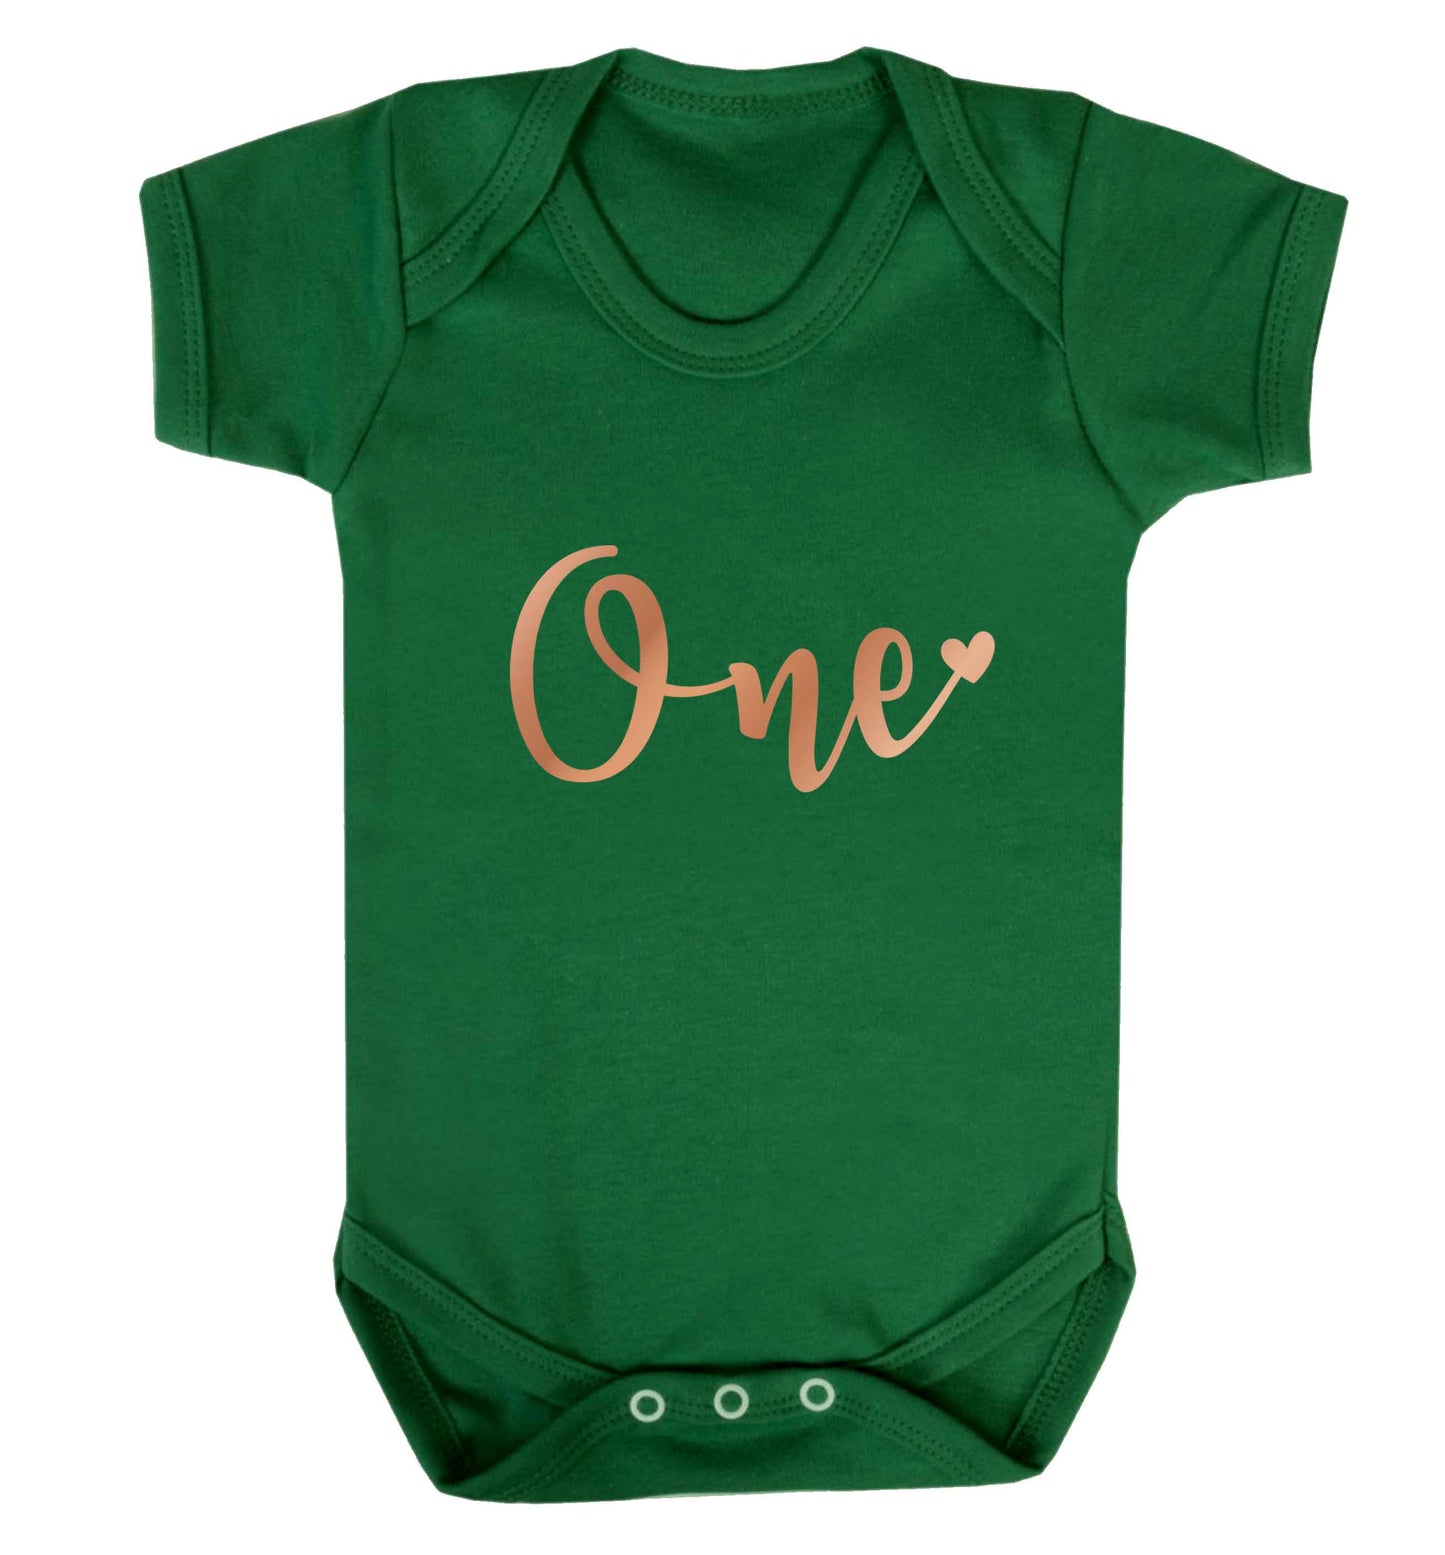 Rose Gold One baby vest green 18-24 months